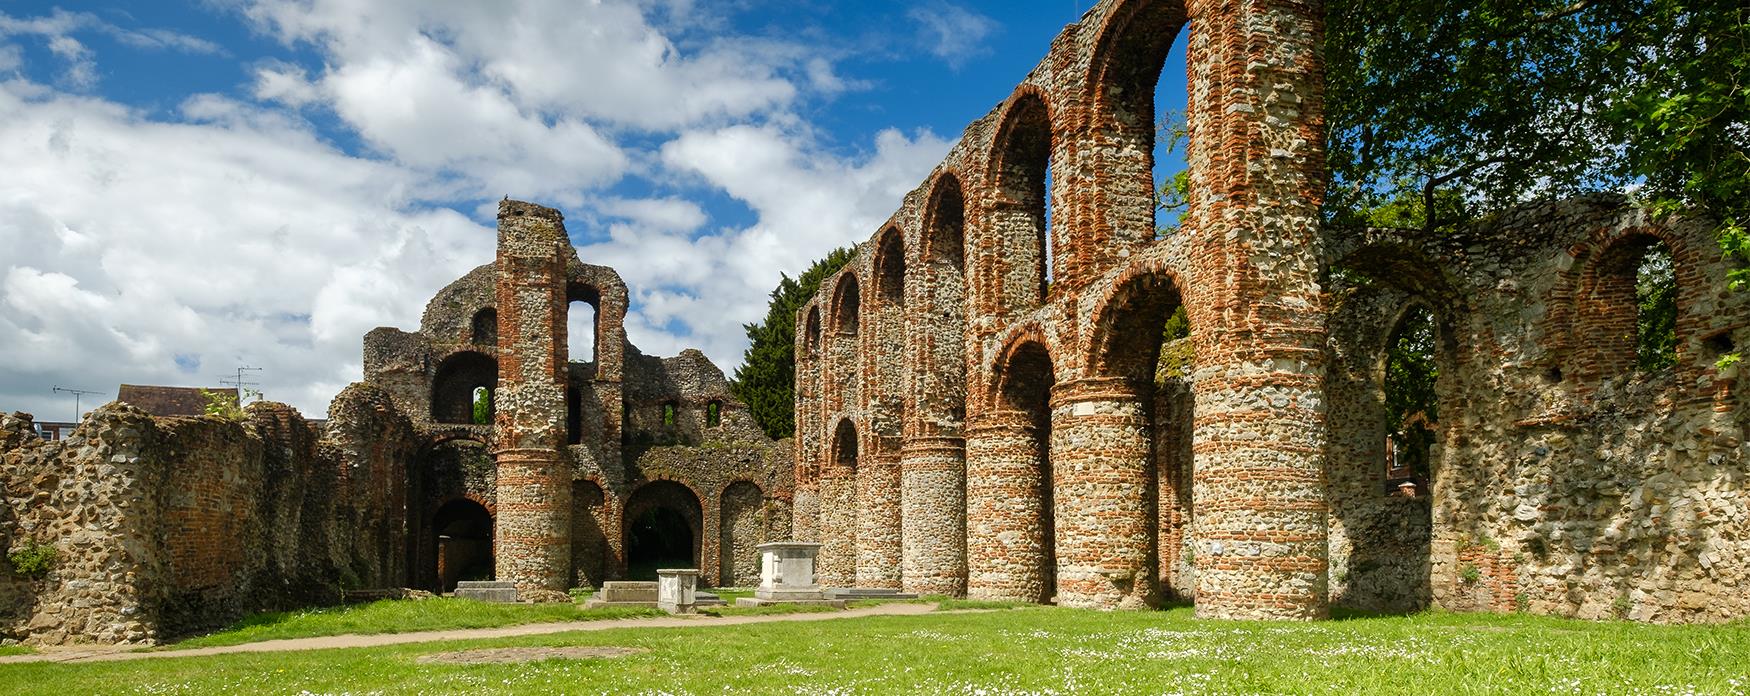 St Botolph's Priory in Colchester